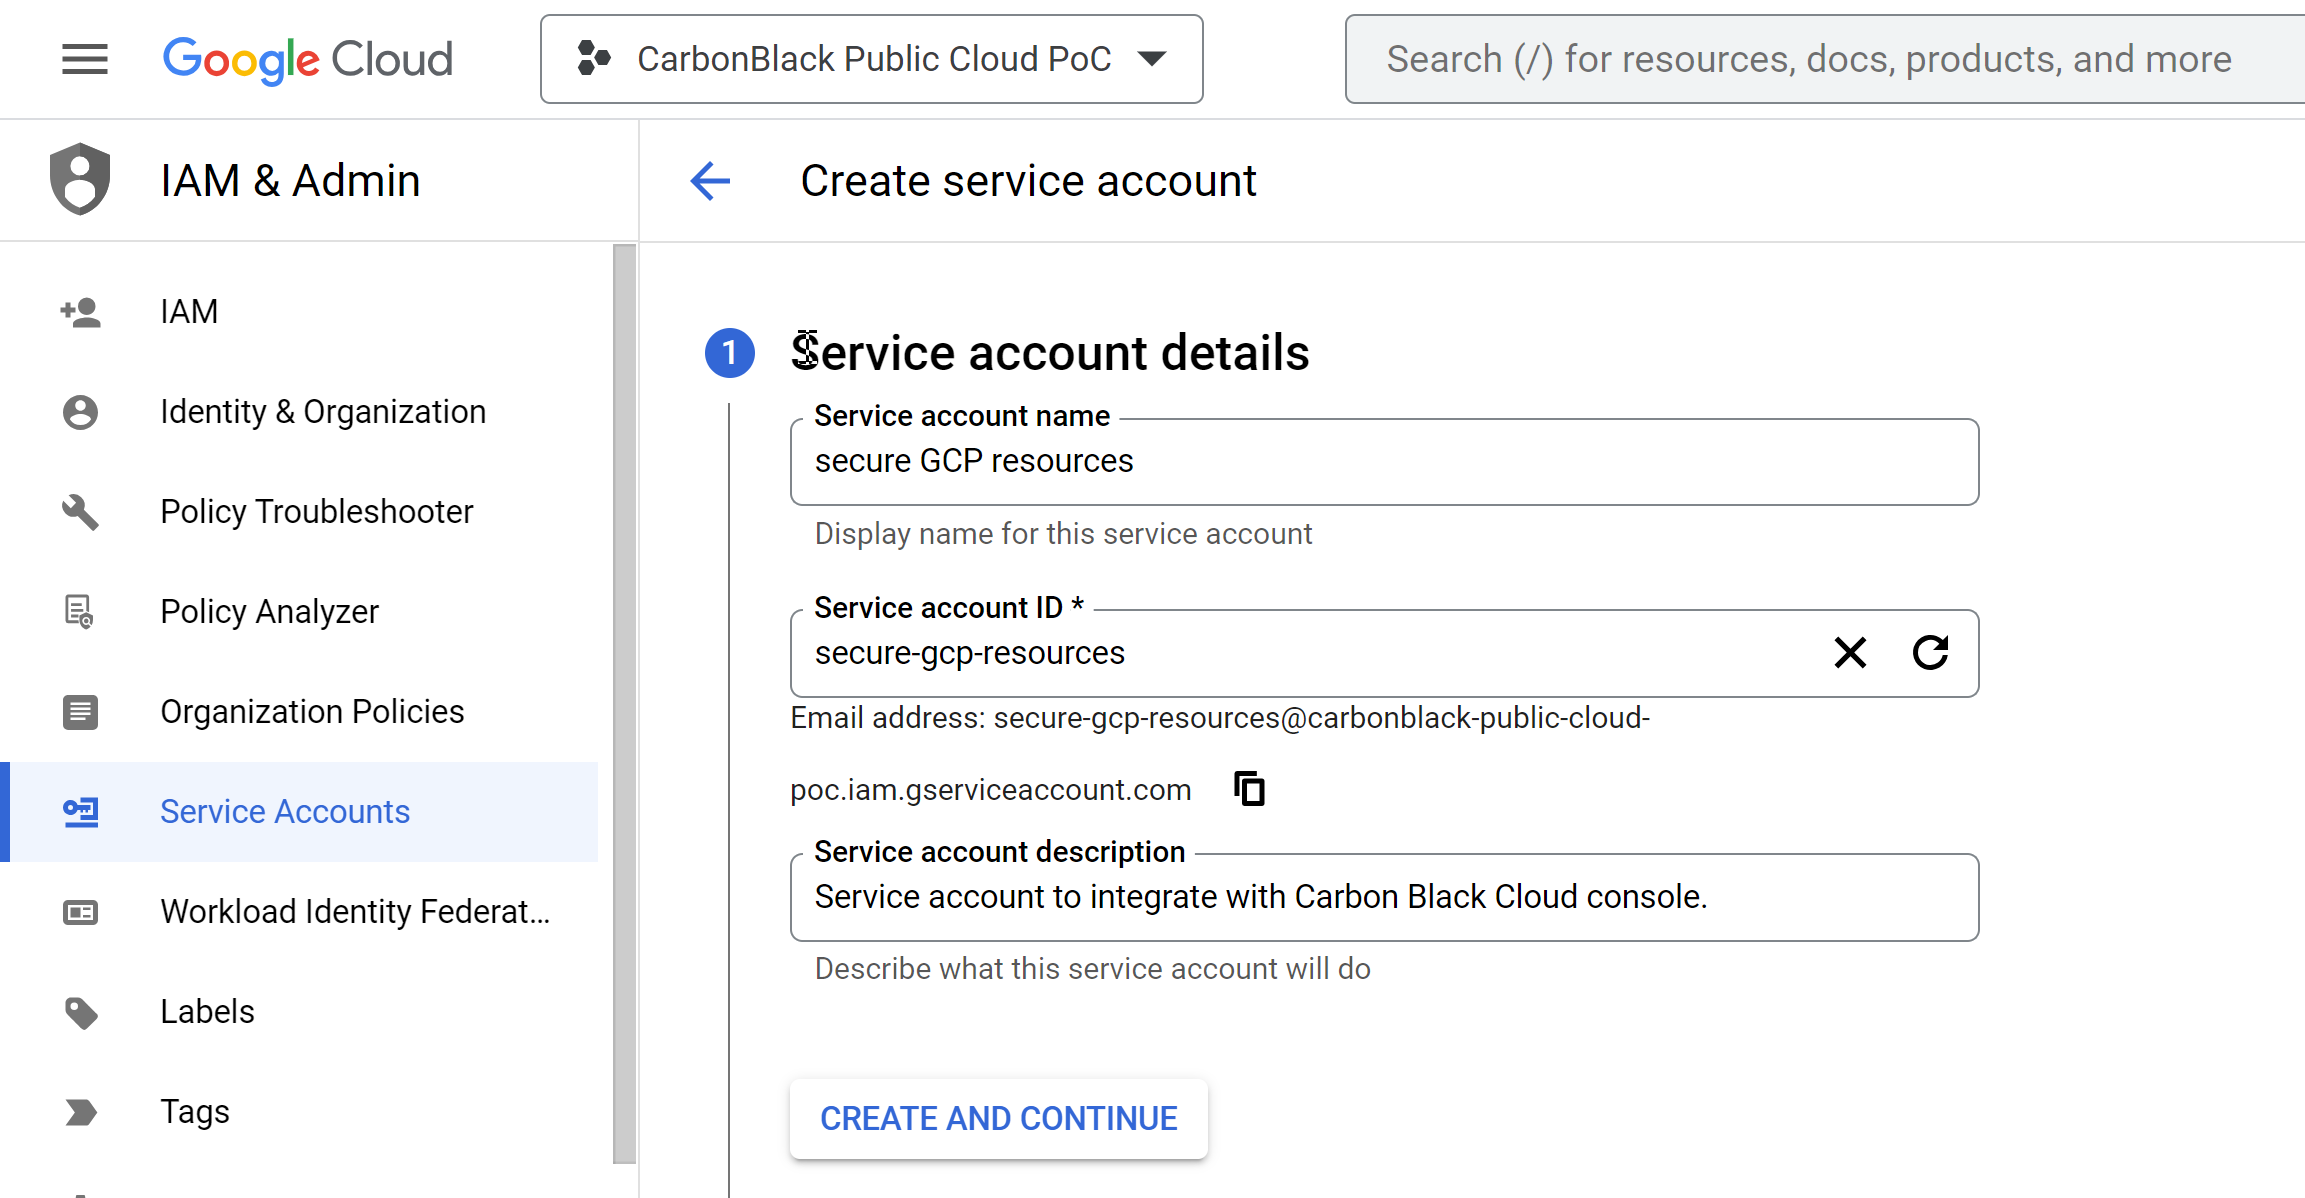 Details on the service account associated with the Google Cloud project to be onboarded.